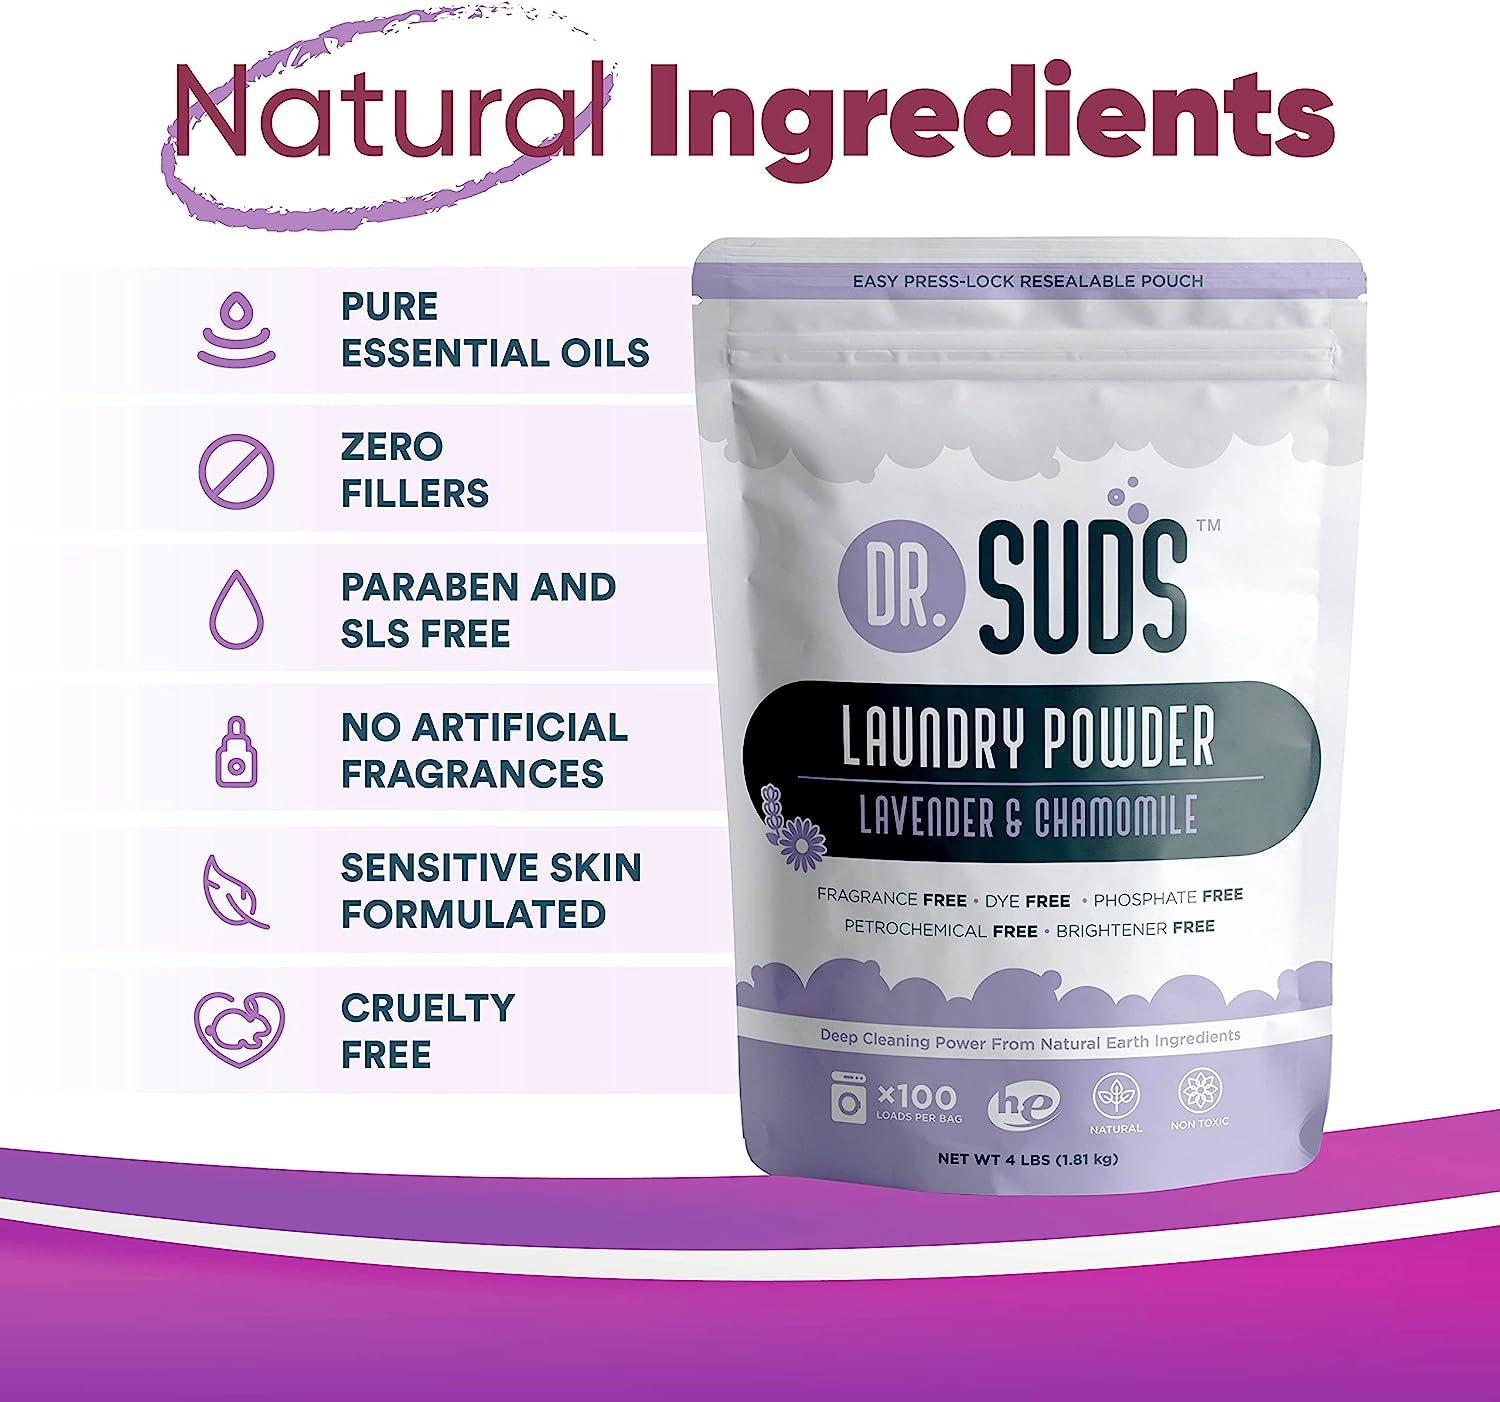 Dr Suds Laundry Powder, 100+ Washes, 4lbs, Exp 11/24, 532dfp